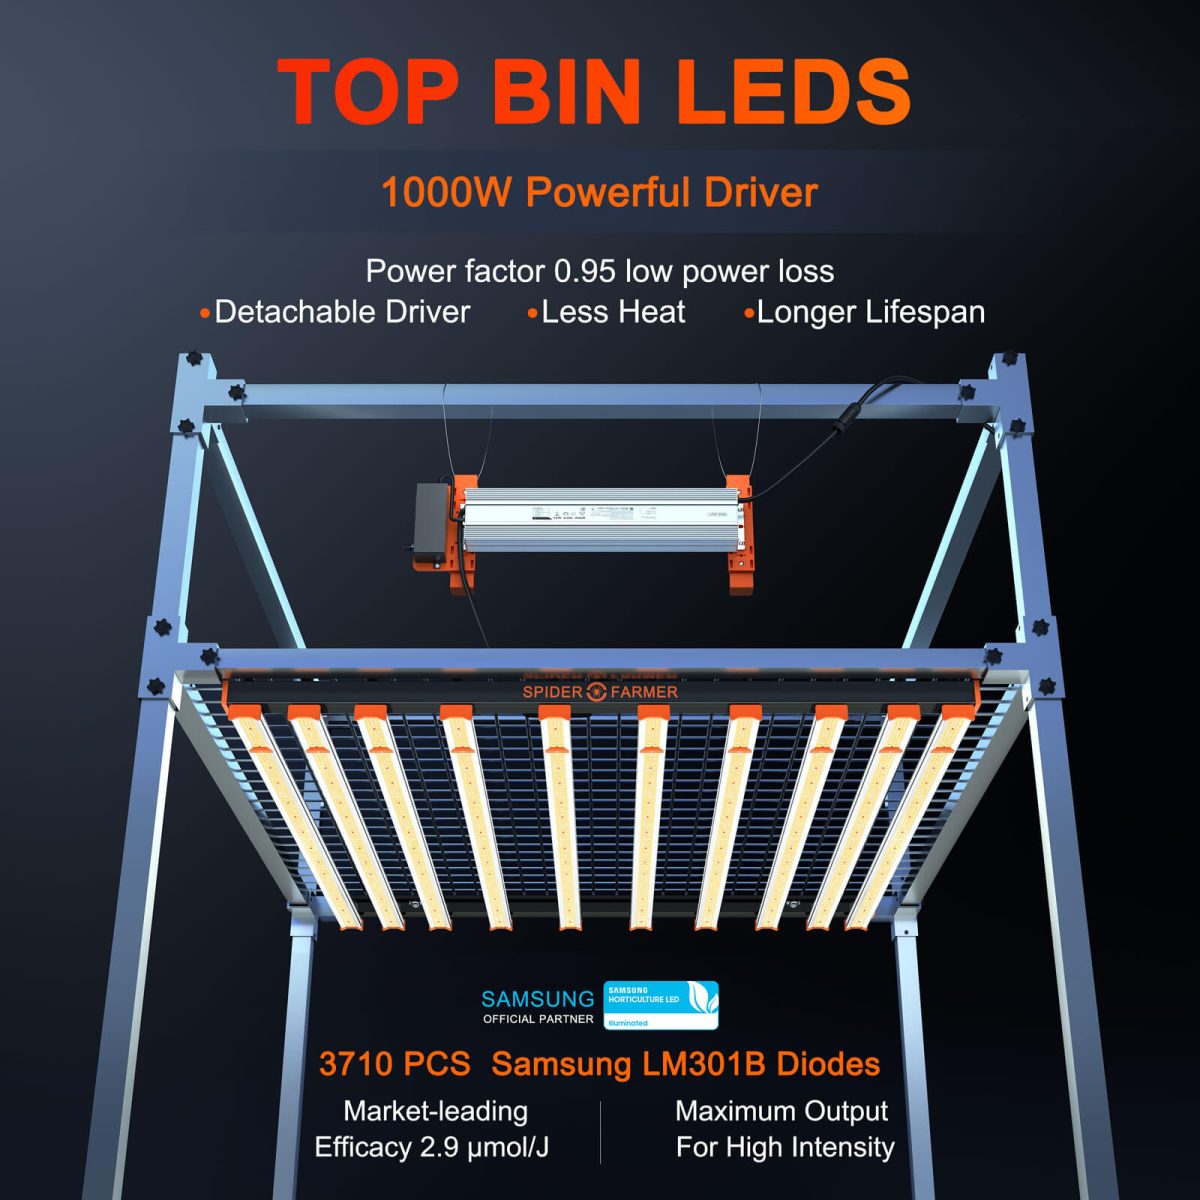 Features of SE1000W Led Grow Light